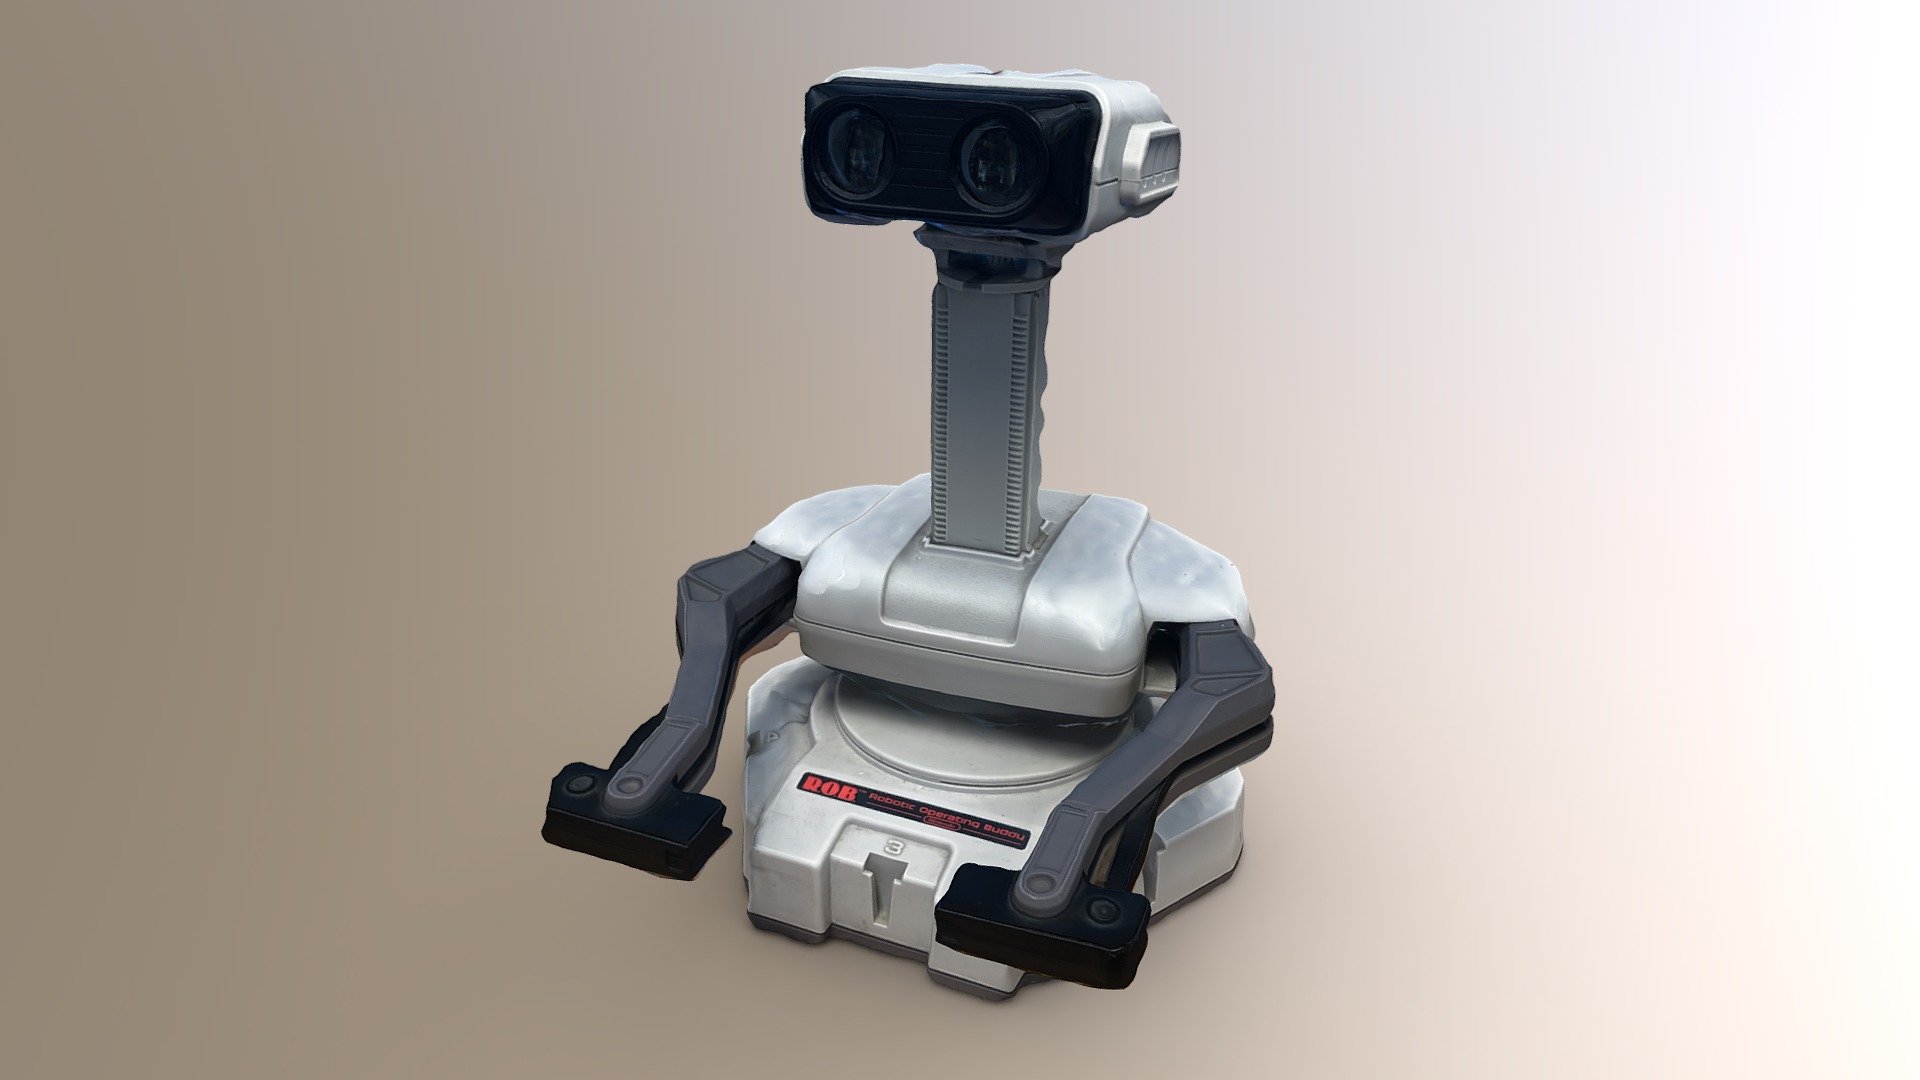 Created in RealityCapture by Capturing Reality from 264 images in 00h:31m:17s.

Robotic Operating Buddy - Robotic Operating Buddy "R.O.B."(photogrammetry) - Download Free 3D model by Austin Beaulier (@Austin.Beaulier) 3d model